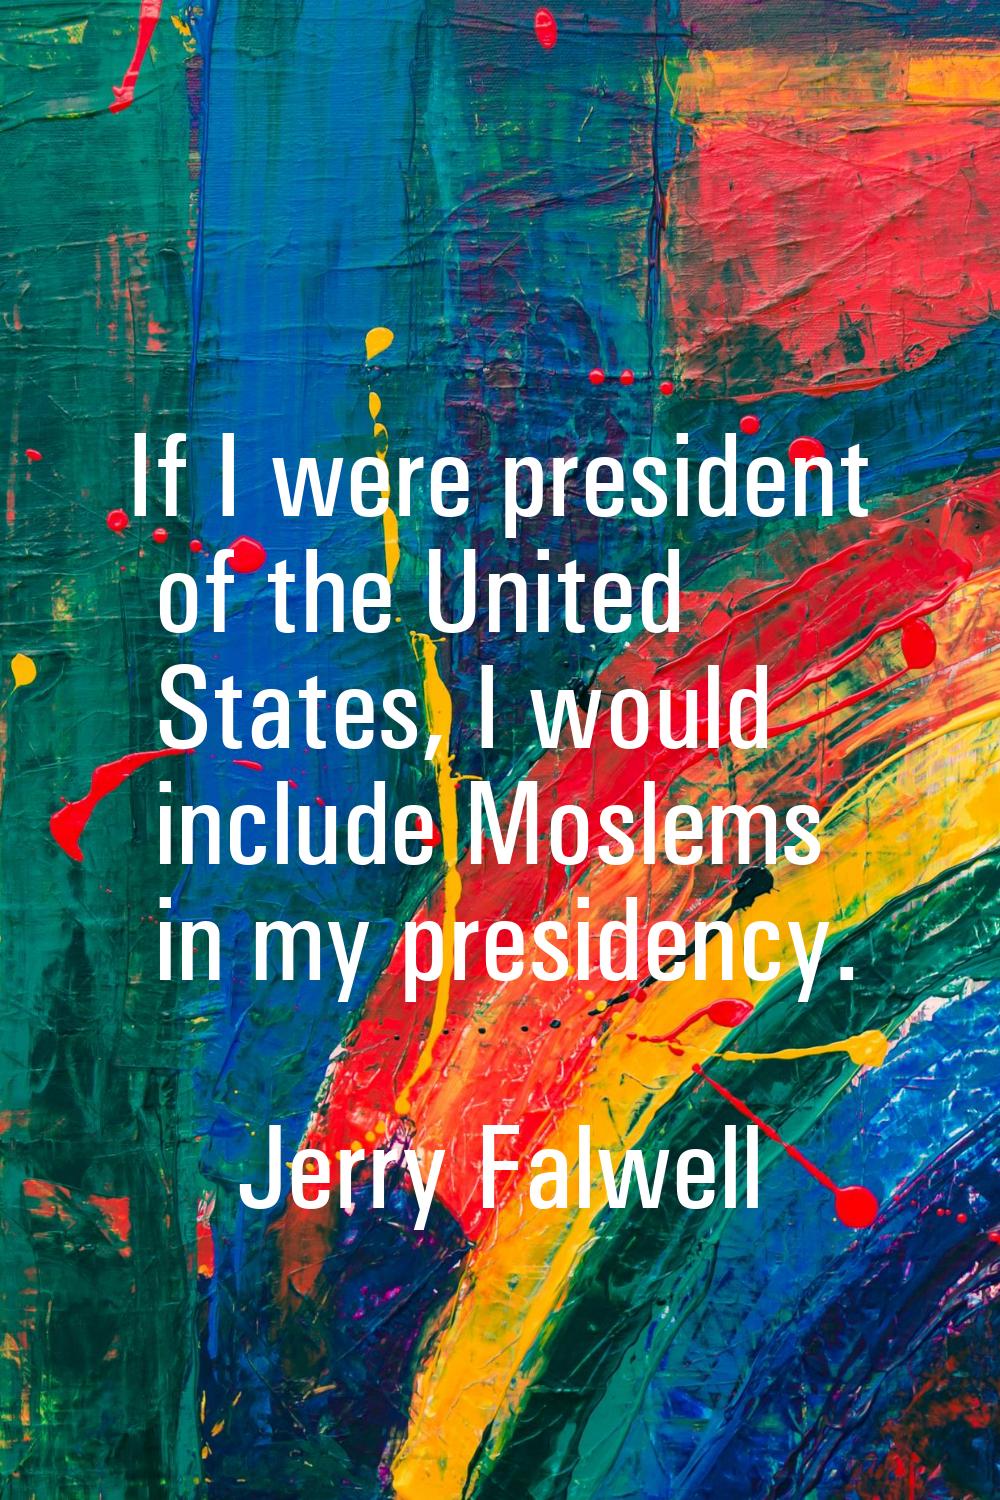 If I were president of the United States, I would include Moslems in my presidency.